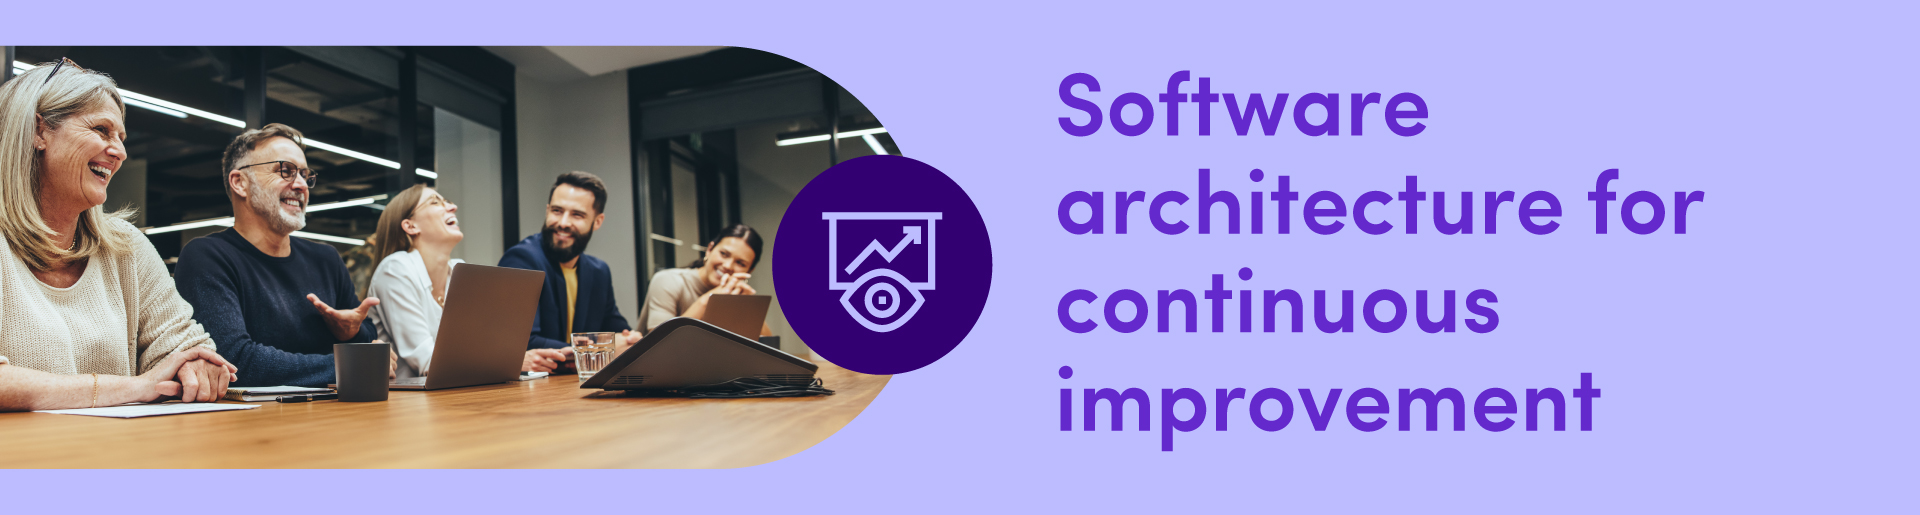 Software-architecture-for-continuous-improvement